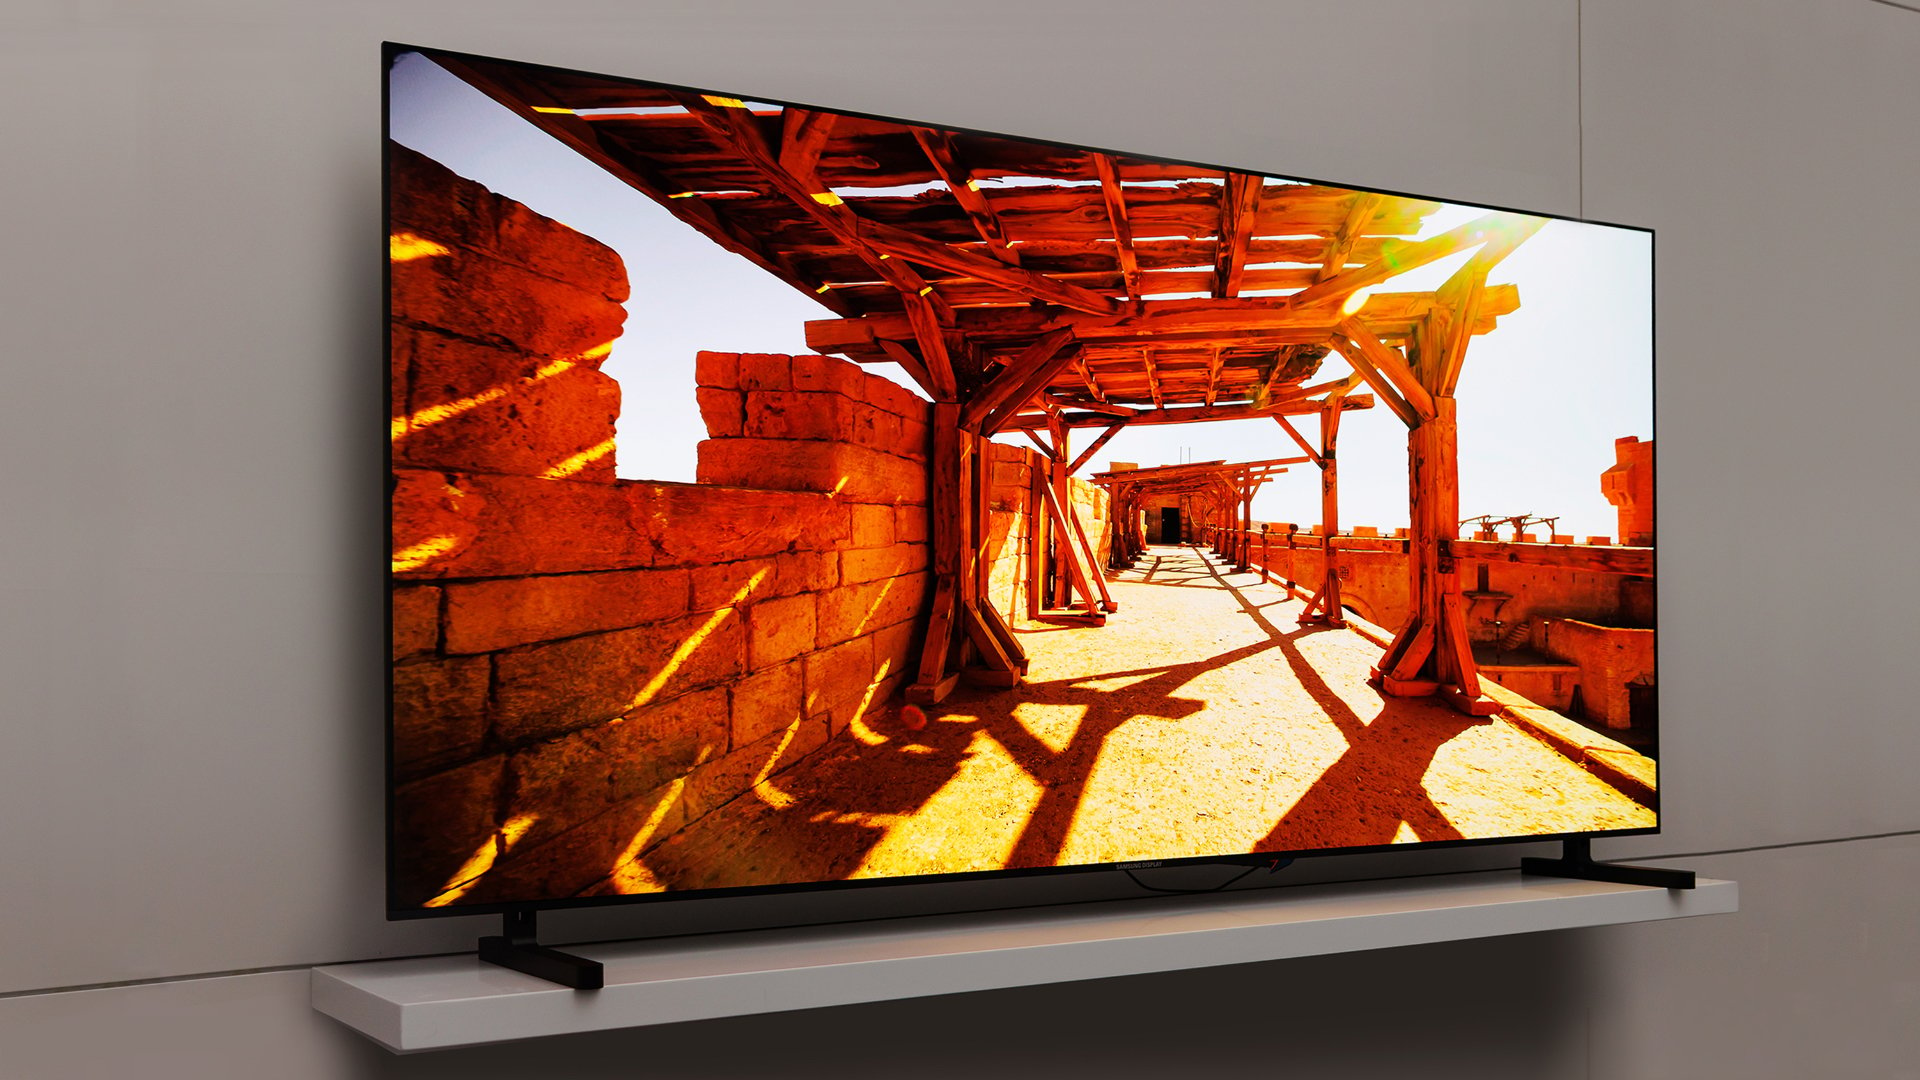 Here's how much Sony's new 8K and QD-OLED Bravia TVs will cost